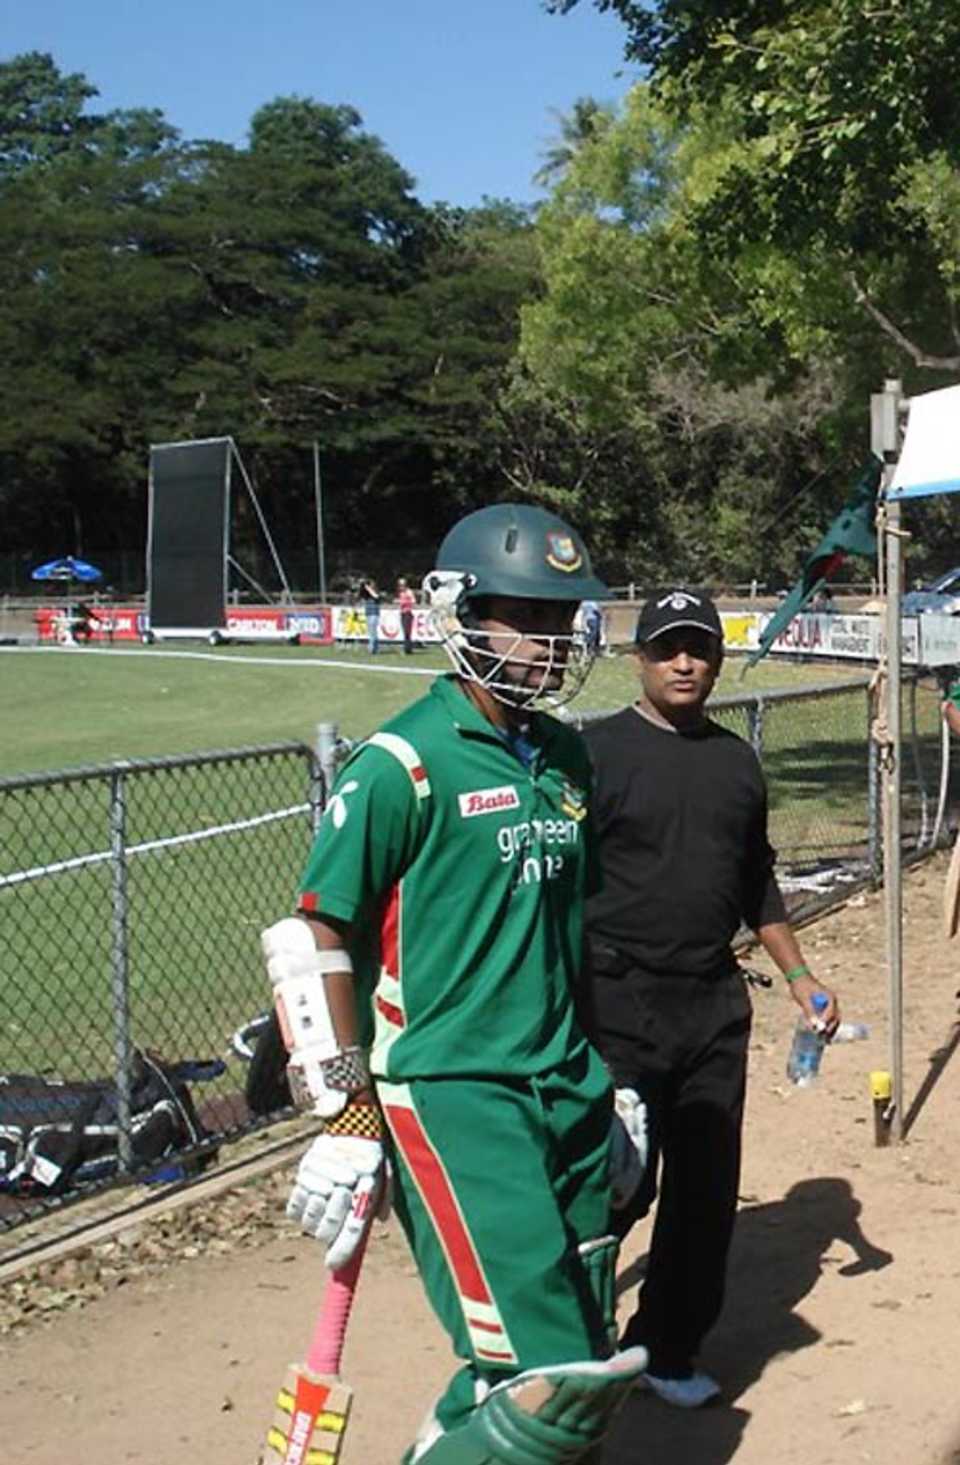 Tamim Iqbal returns to the pavilion after scoring 85